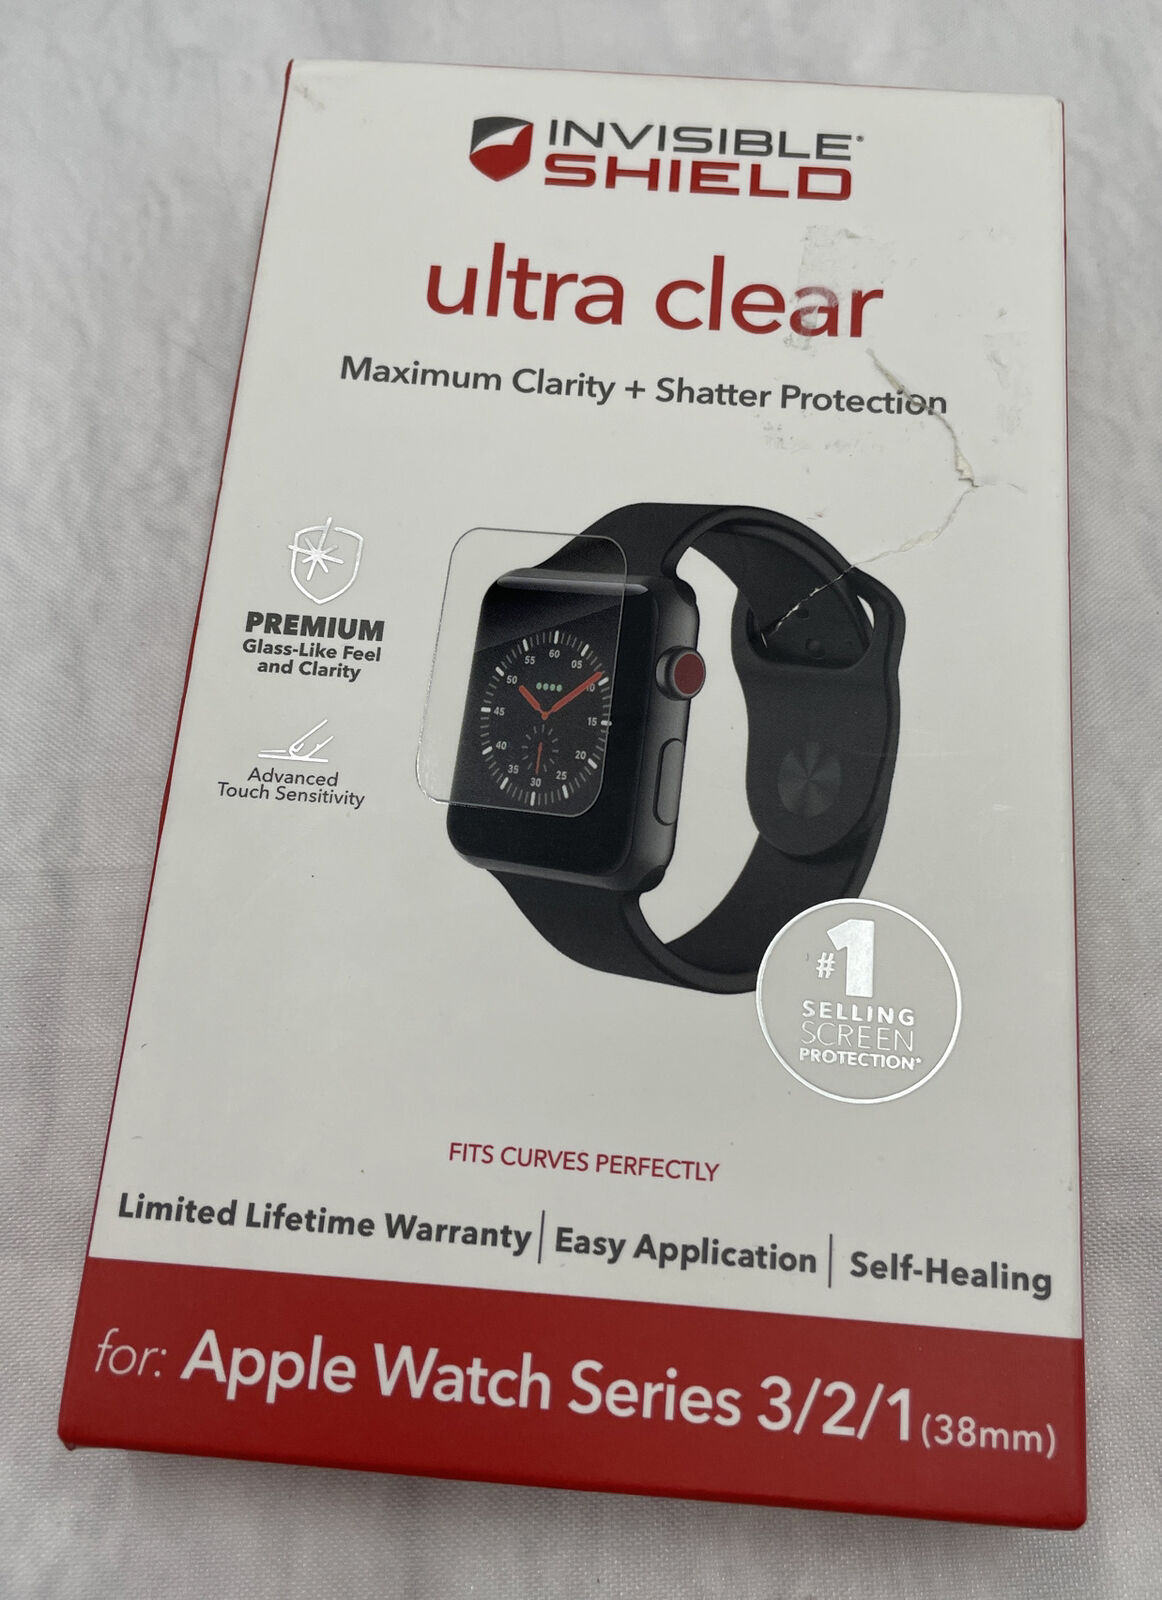 Zagg Invisibleshield Ultra Clear Screen Protector For Apple Watch 3/2/1 38mm